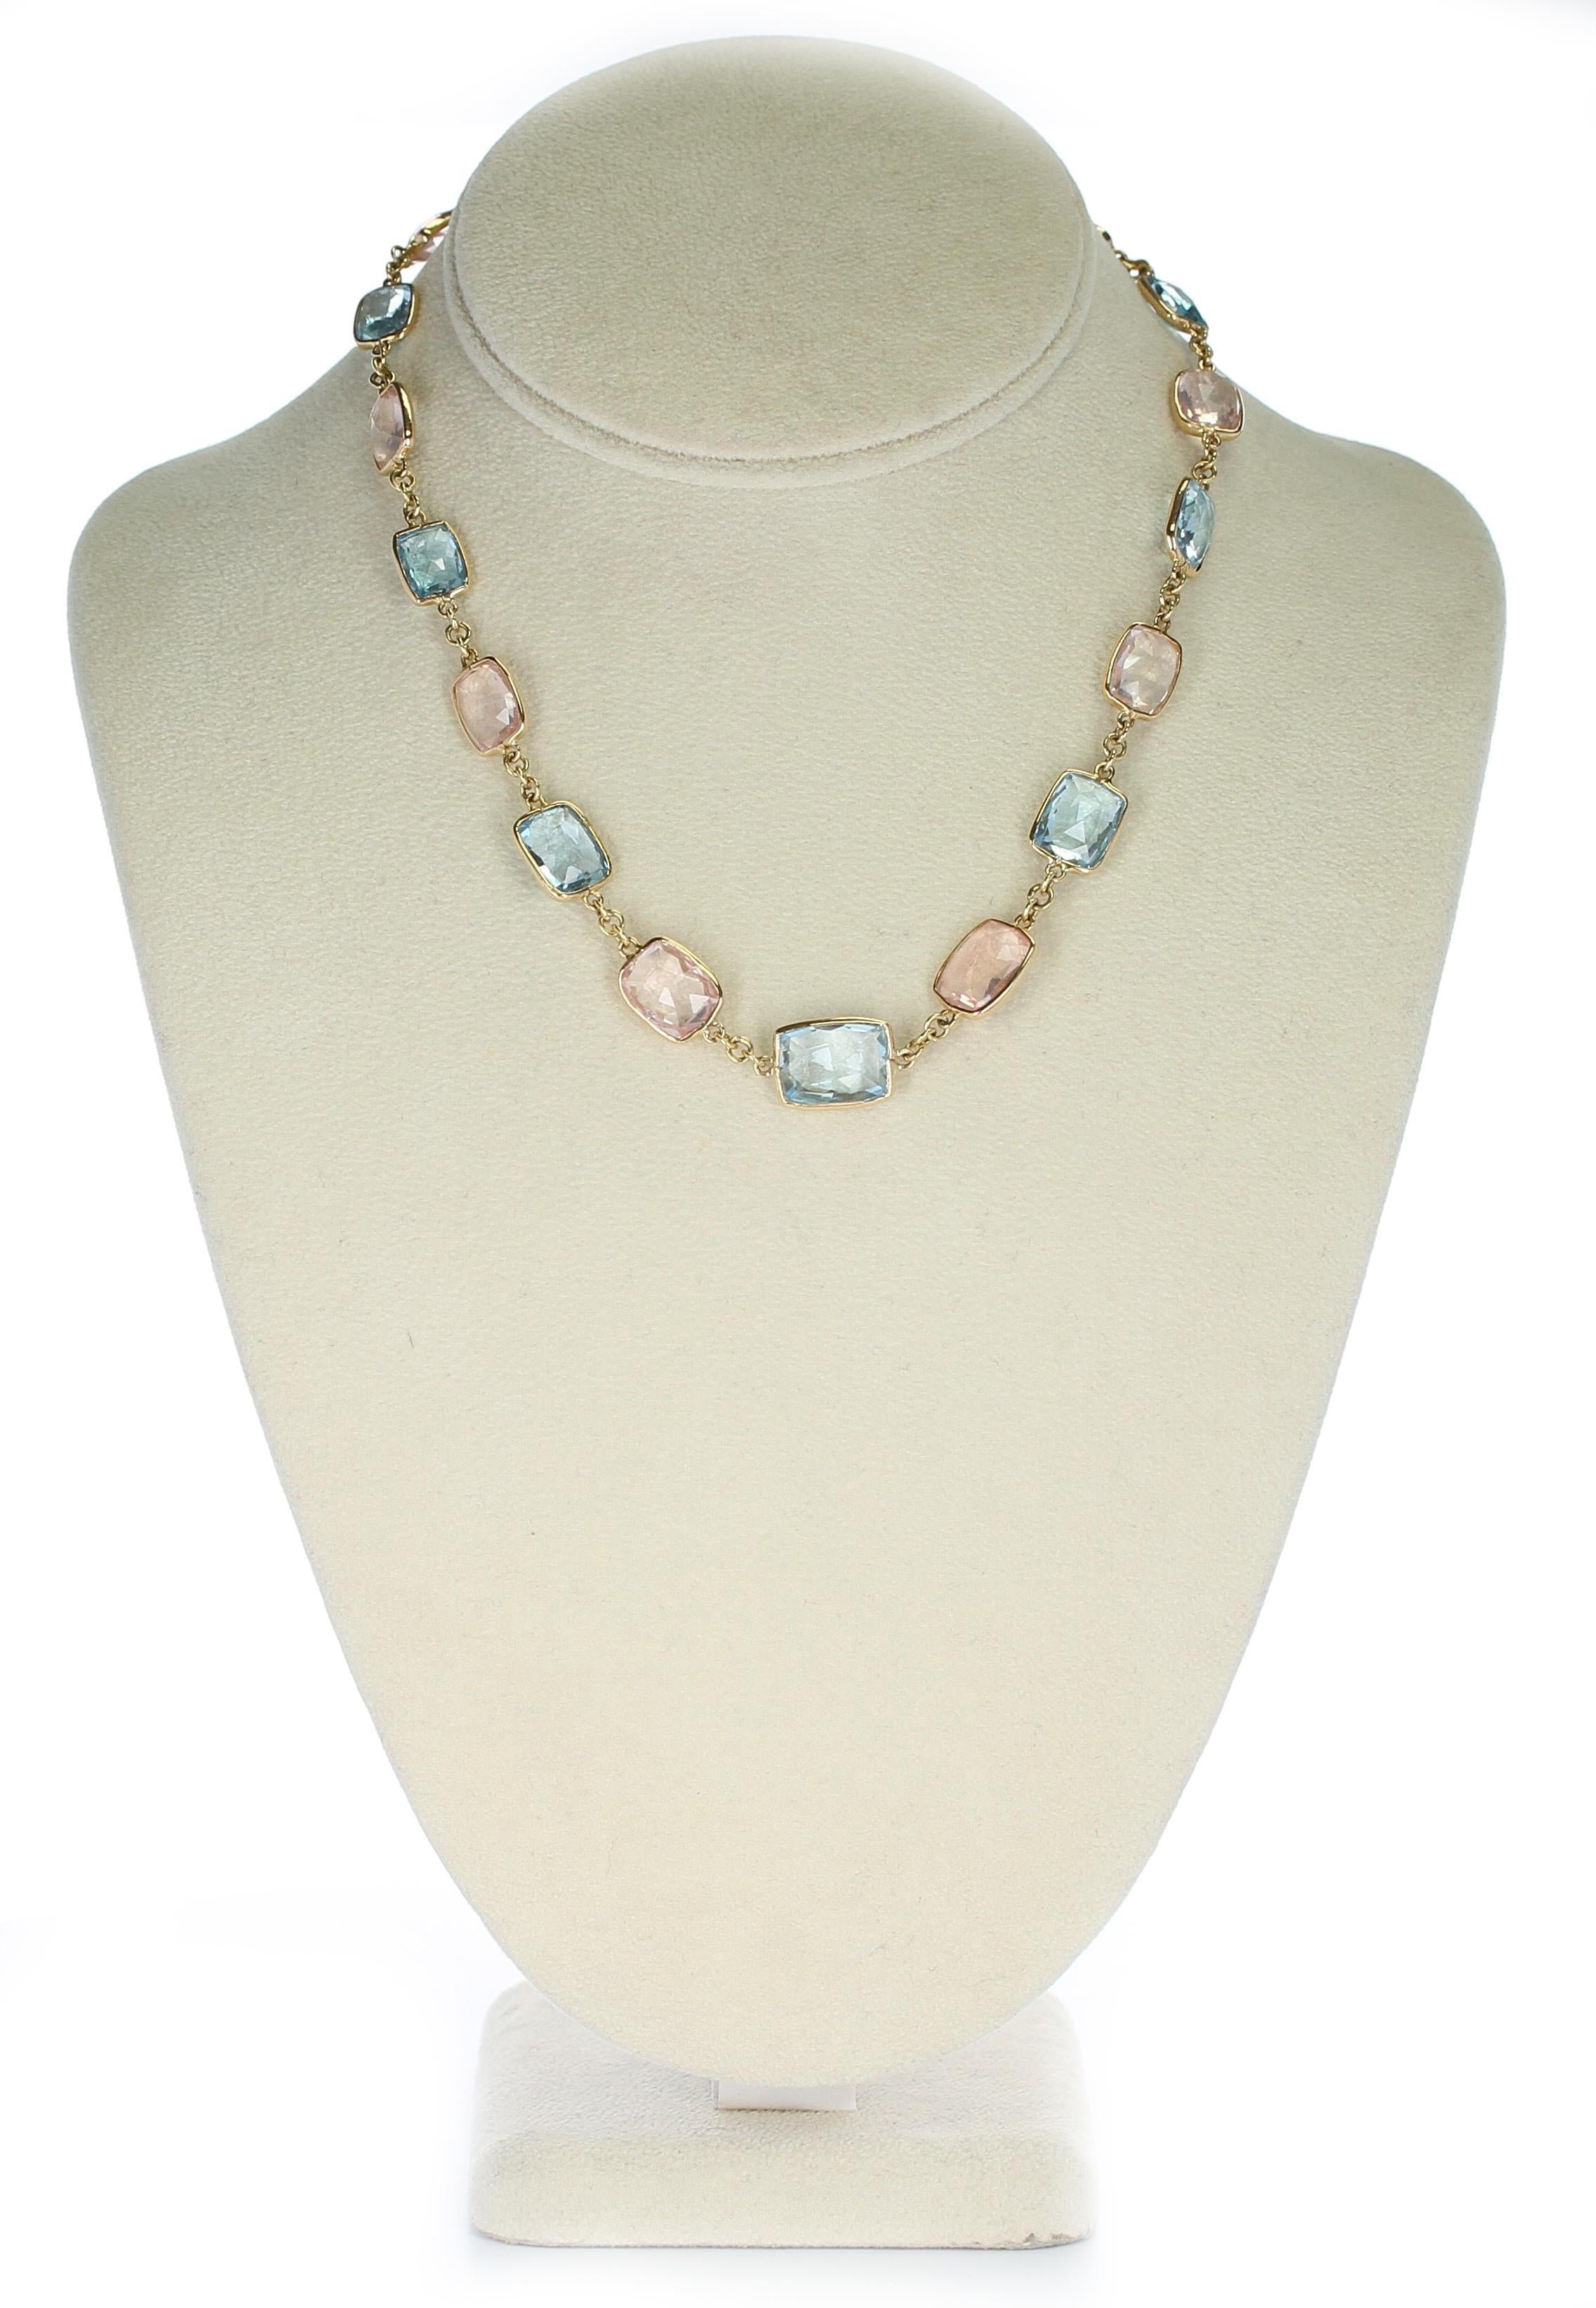 A fine 18K Yellow Gold Necklace with faceted Double Cabochon rectangular-shaped Blue Topaz and Rose Quartz. Length: 16 Inches, Weight: 139 carats, 750 Stamped. 